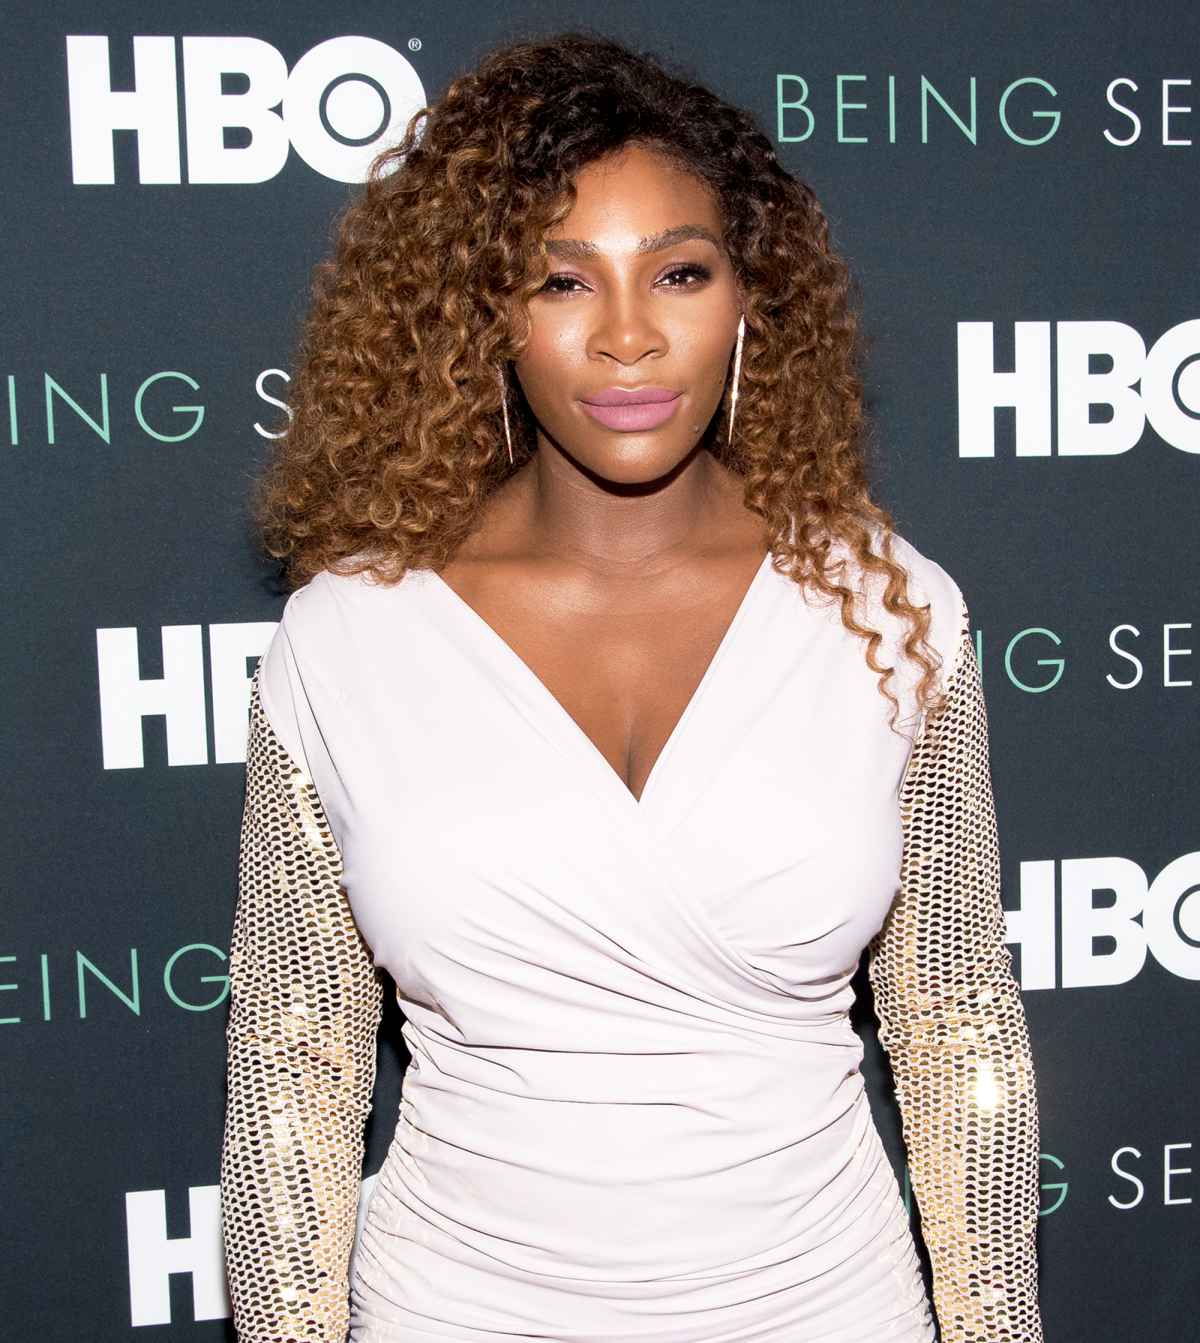 Away launches latest Serena Williams luggage collection